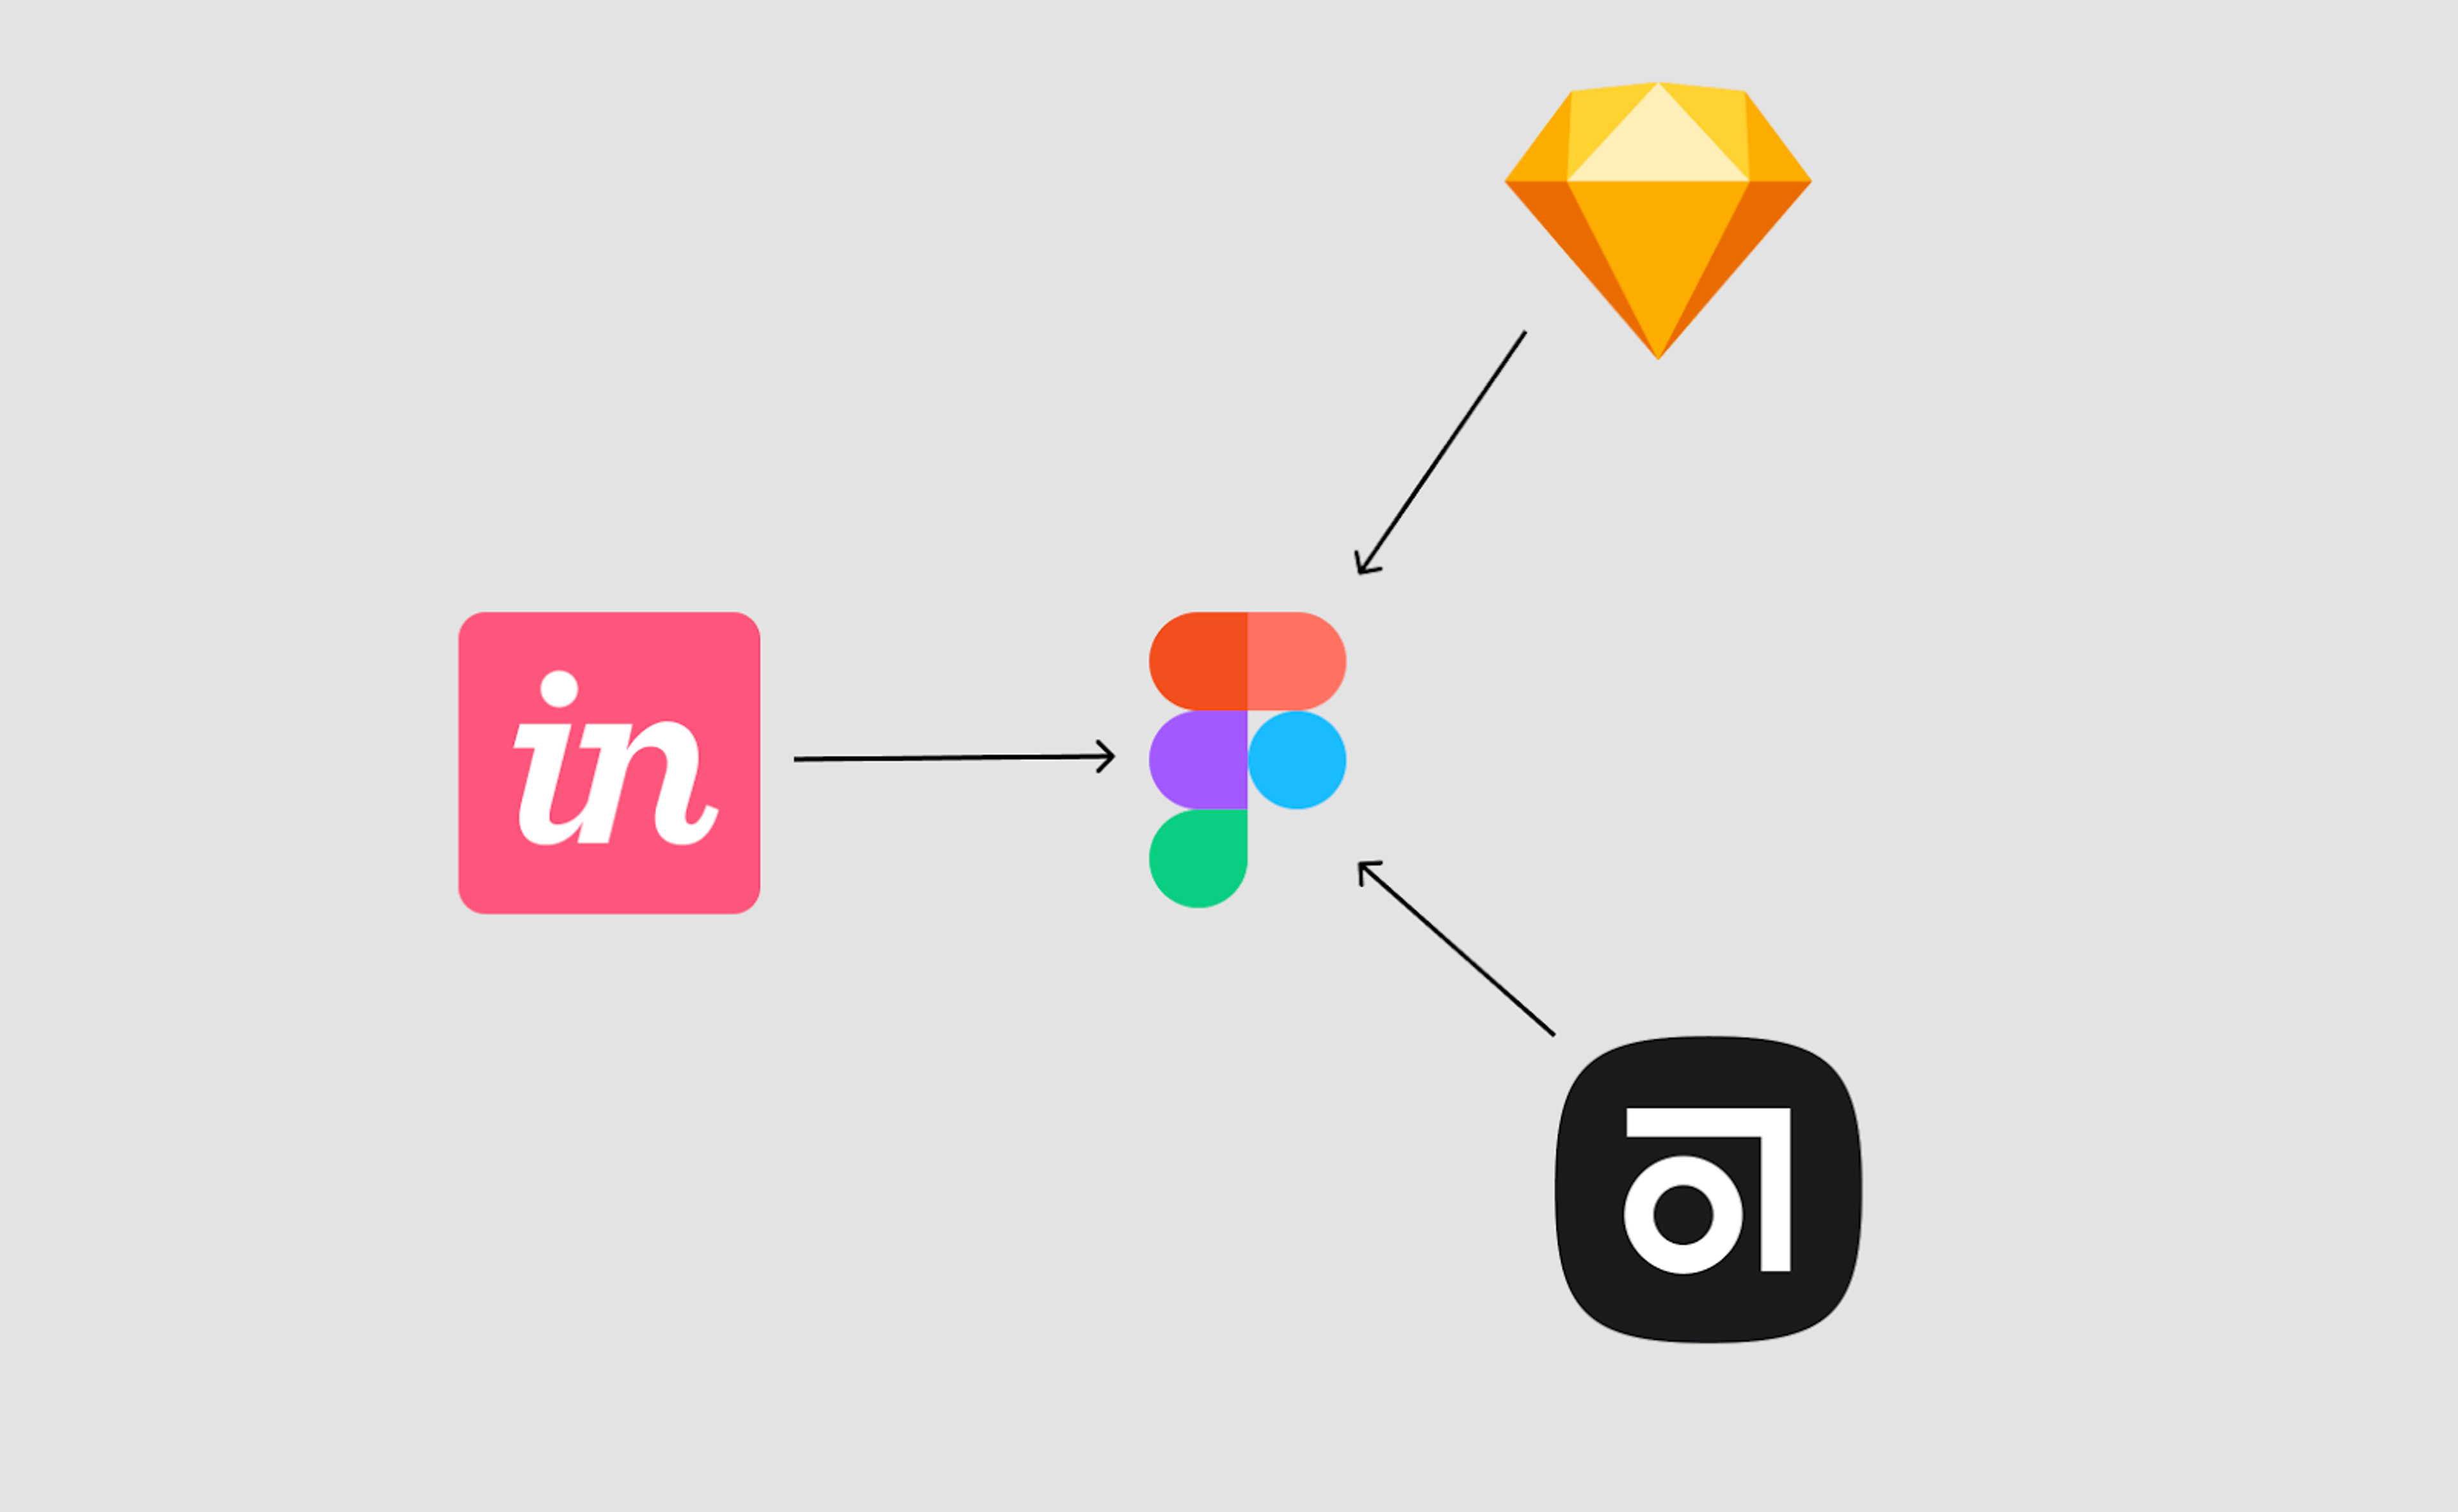 Figma combines elements of Sketch, InVision and Abstract